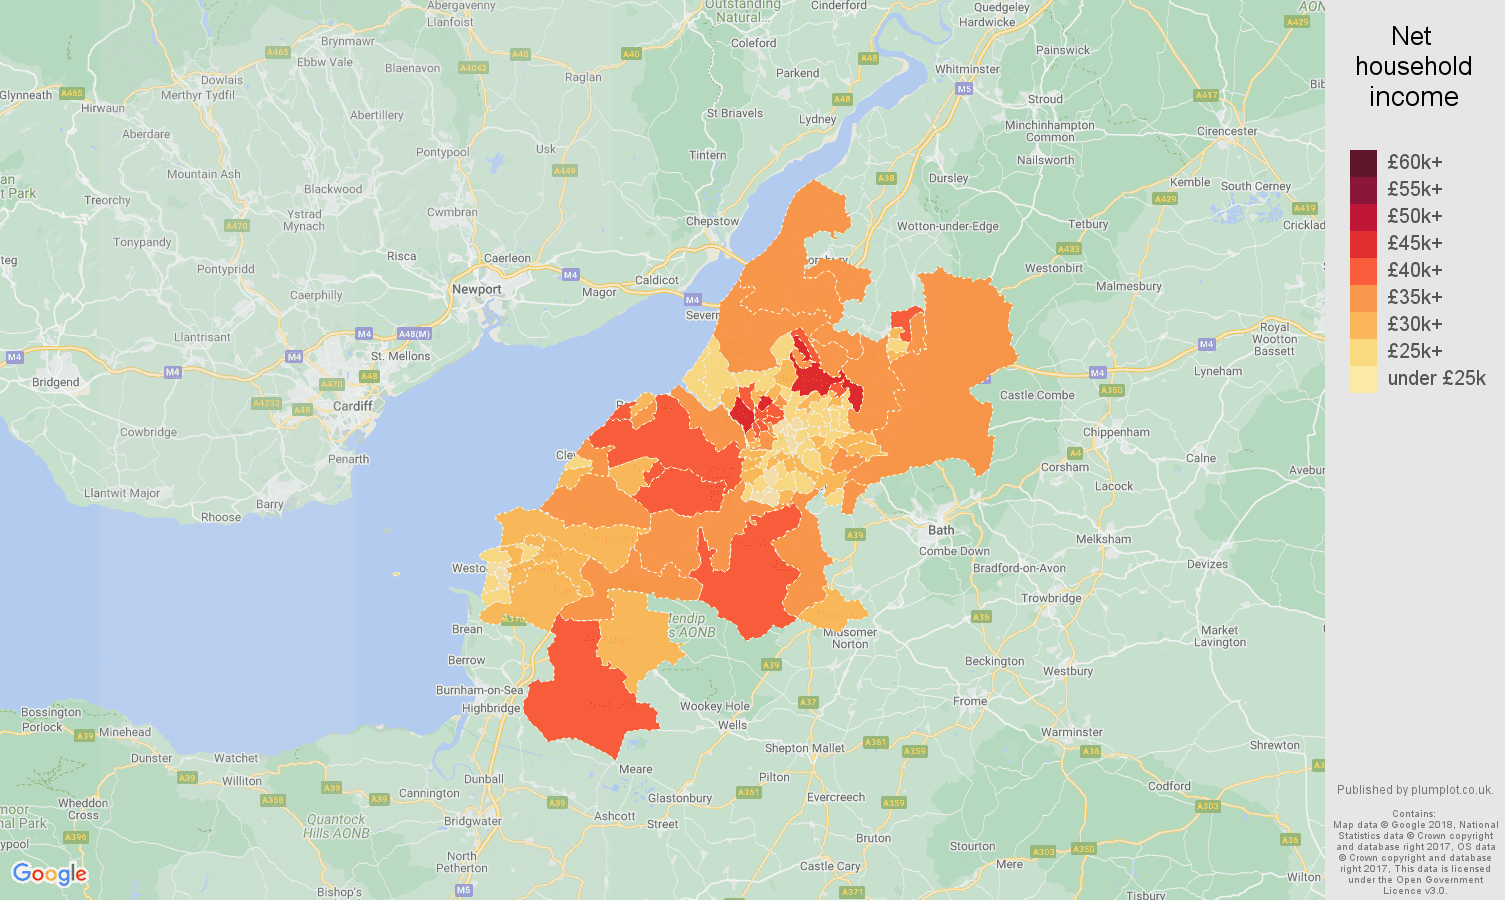 Bristol net household income map